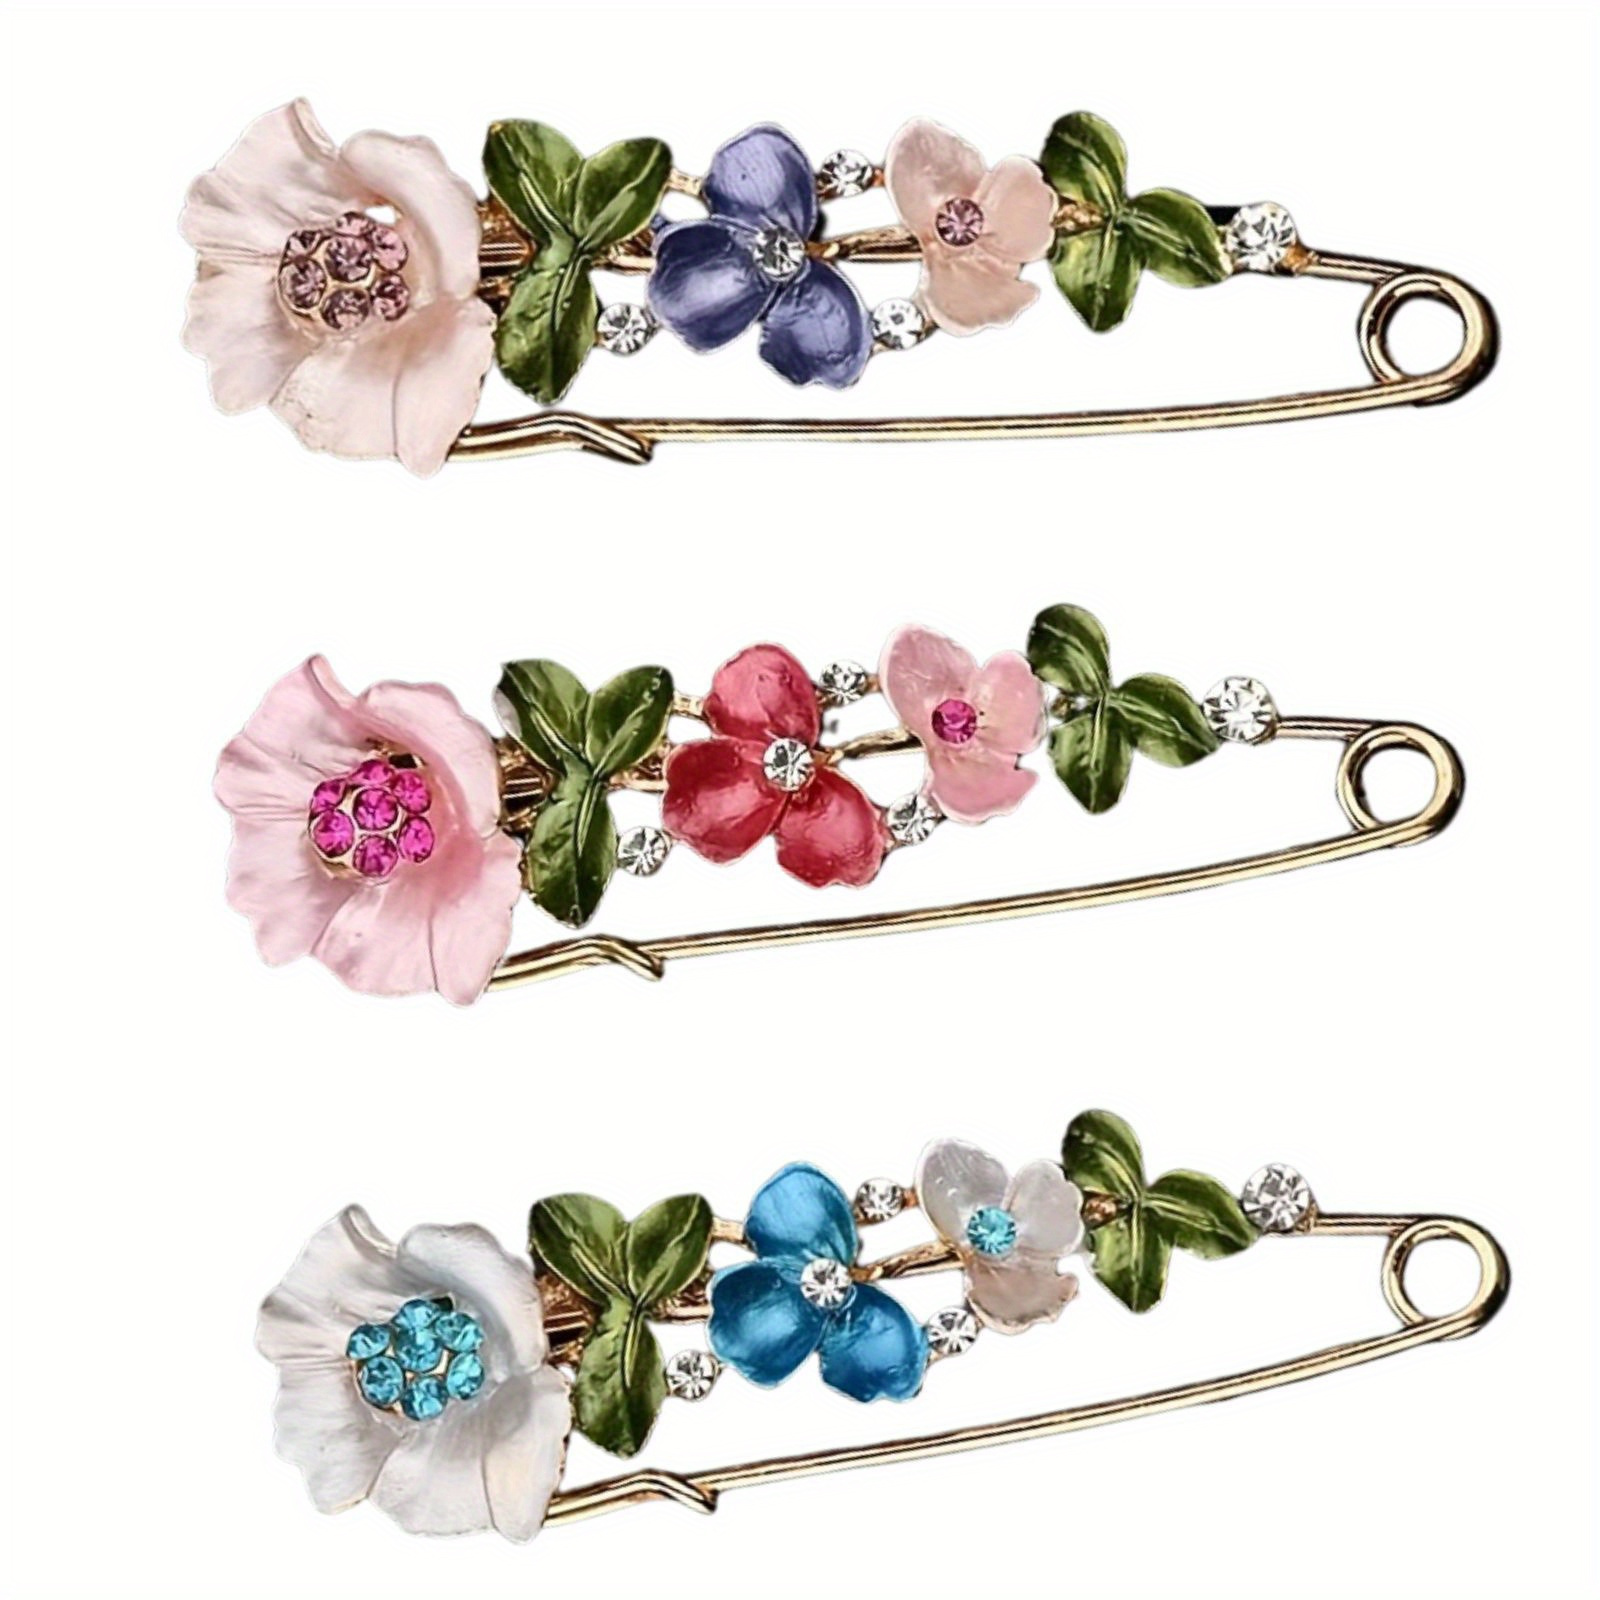 

3-piece Retro Floral Brooch Set - Fashion Rhinestone Safety Pins, Elegant Flower Corsage For Party, Daily Wear, Suit, Jacket, Dress - Mixed Color Collection (rosen, Champagne, Lavender)